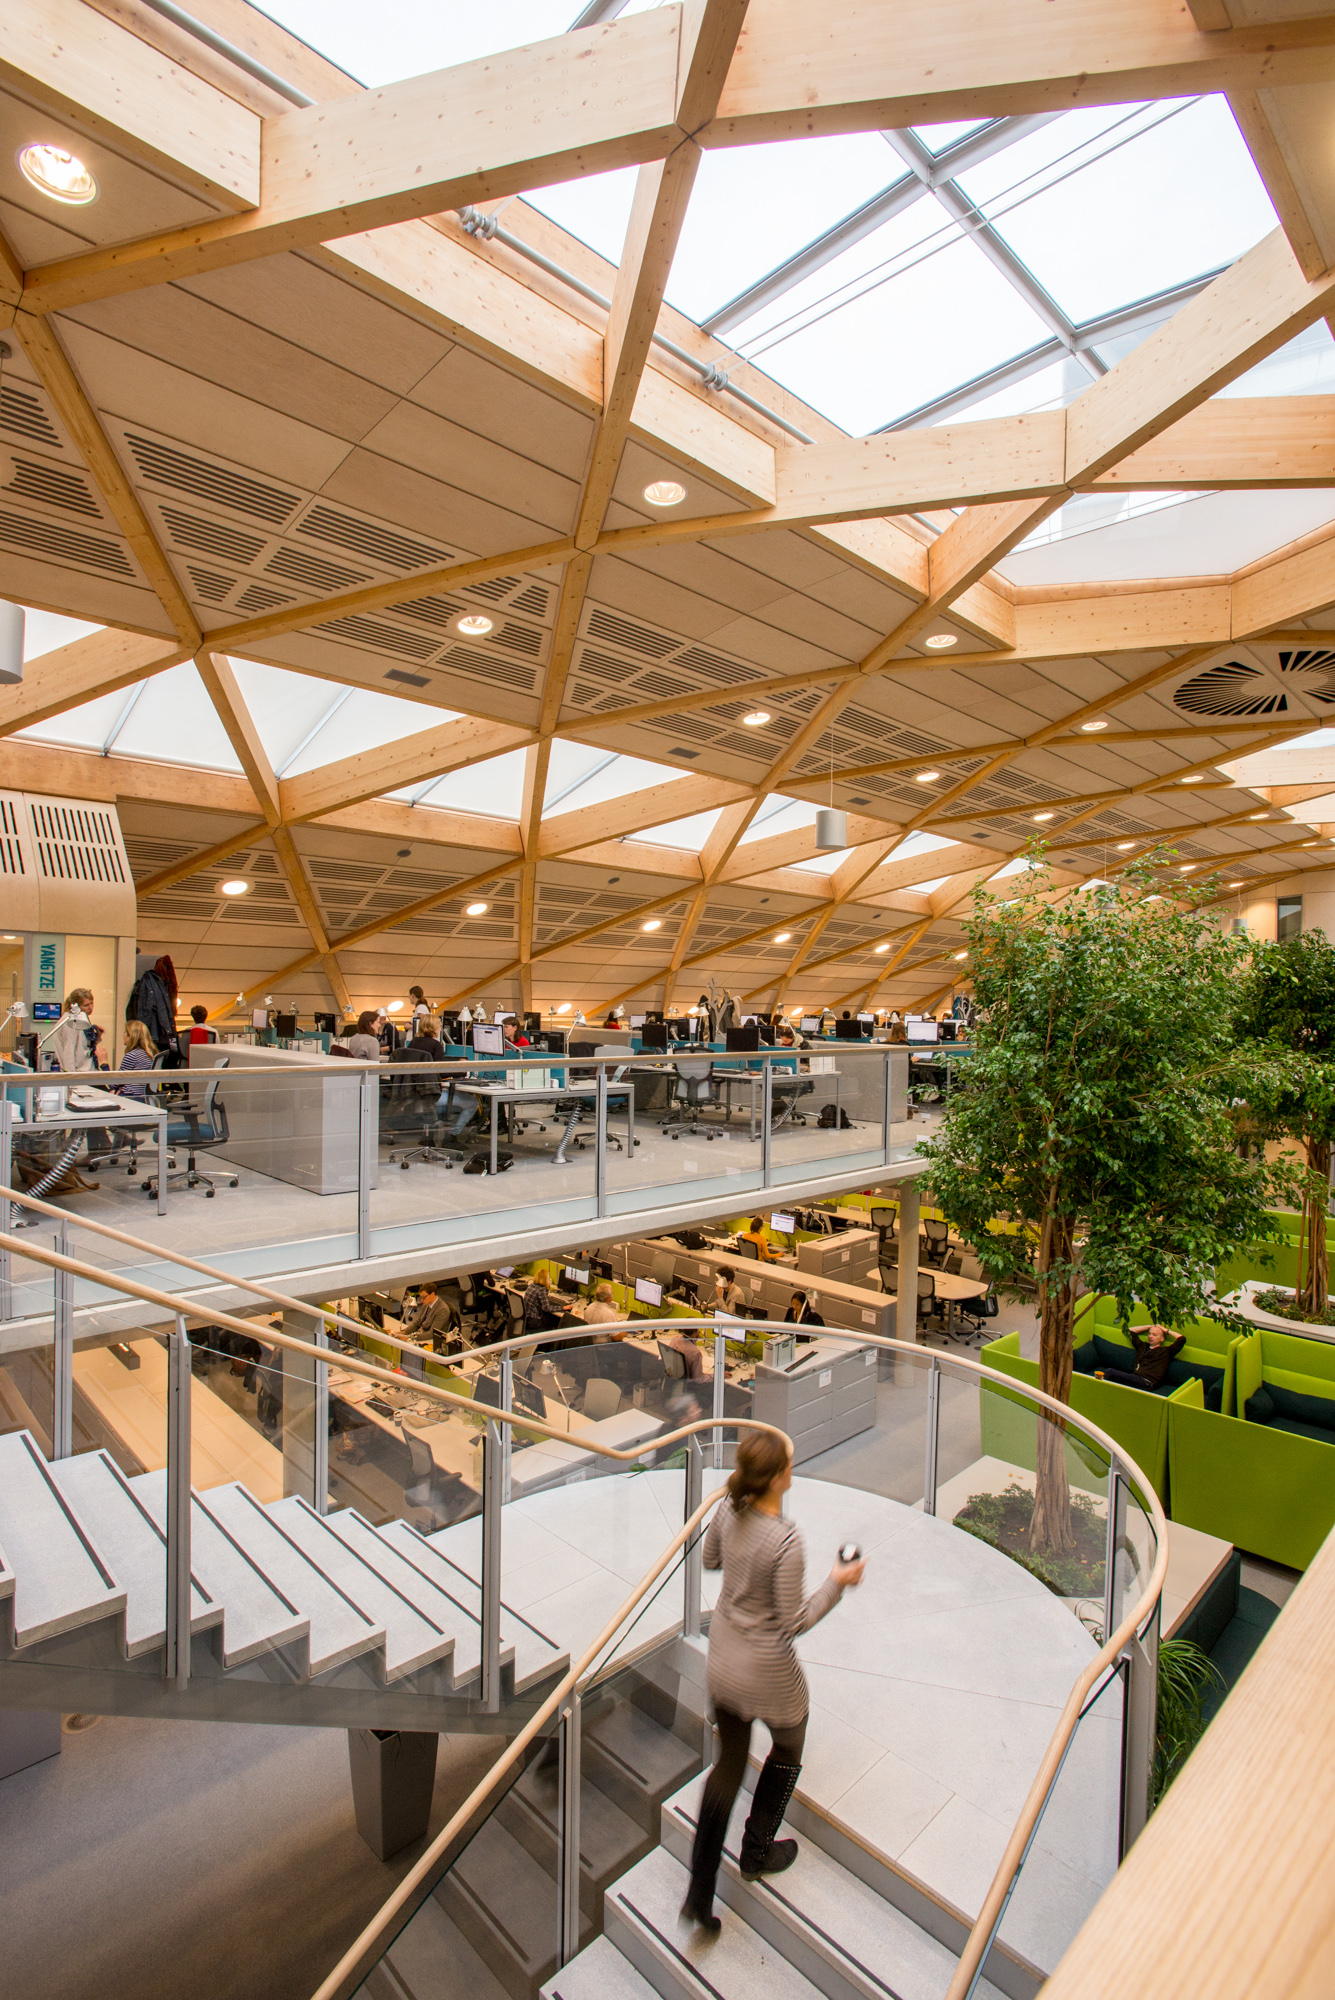 WWF UK HQ, Woking with architectural and interior photography by Richard Stonehouse ,architectural photographer.